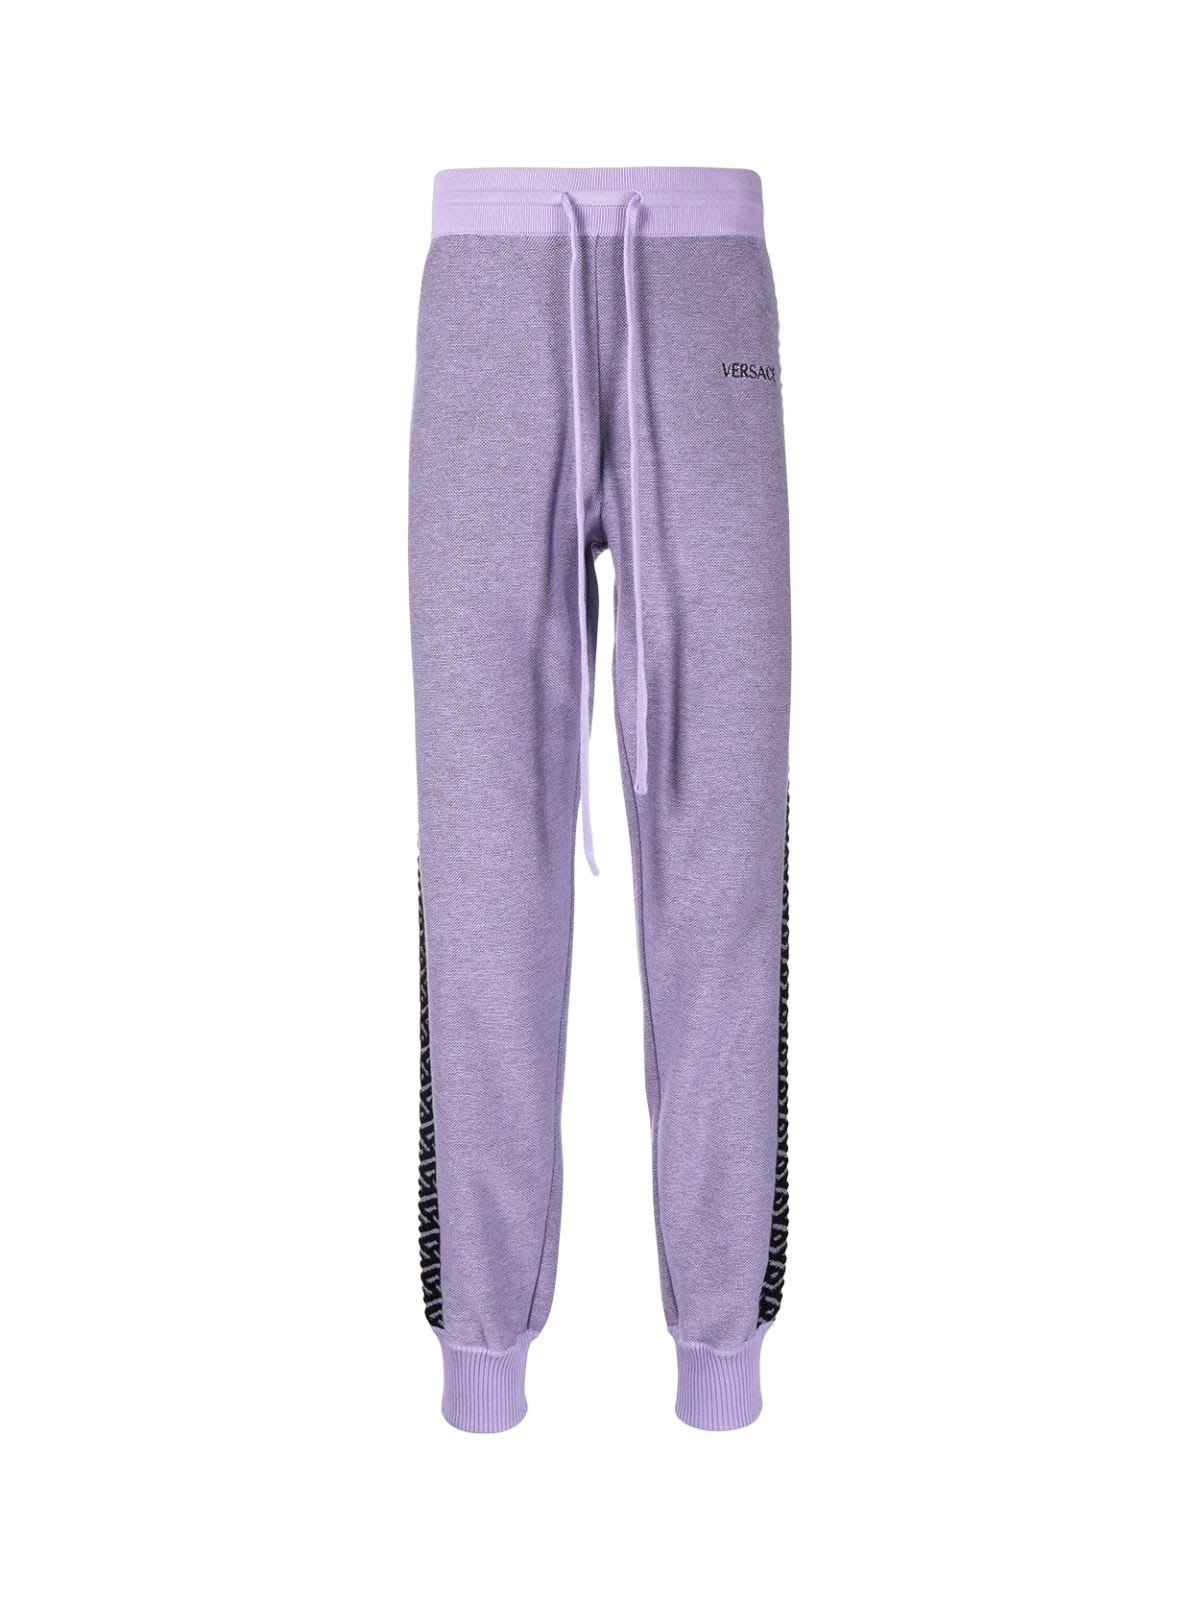 Versace Knit Track Pant